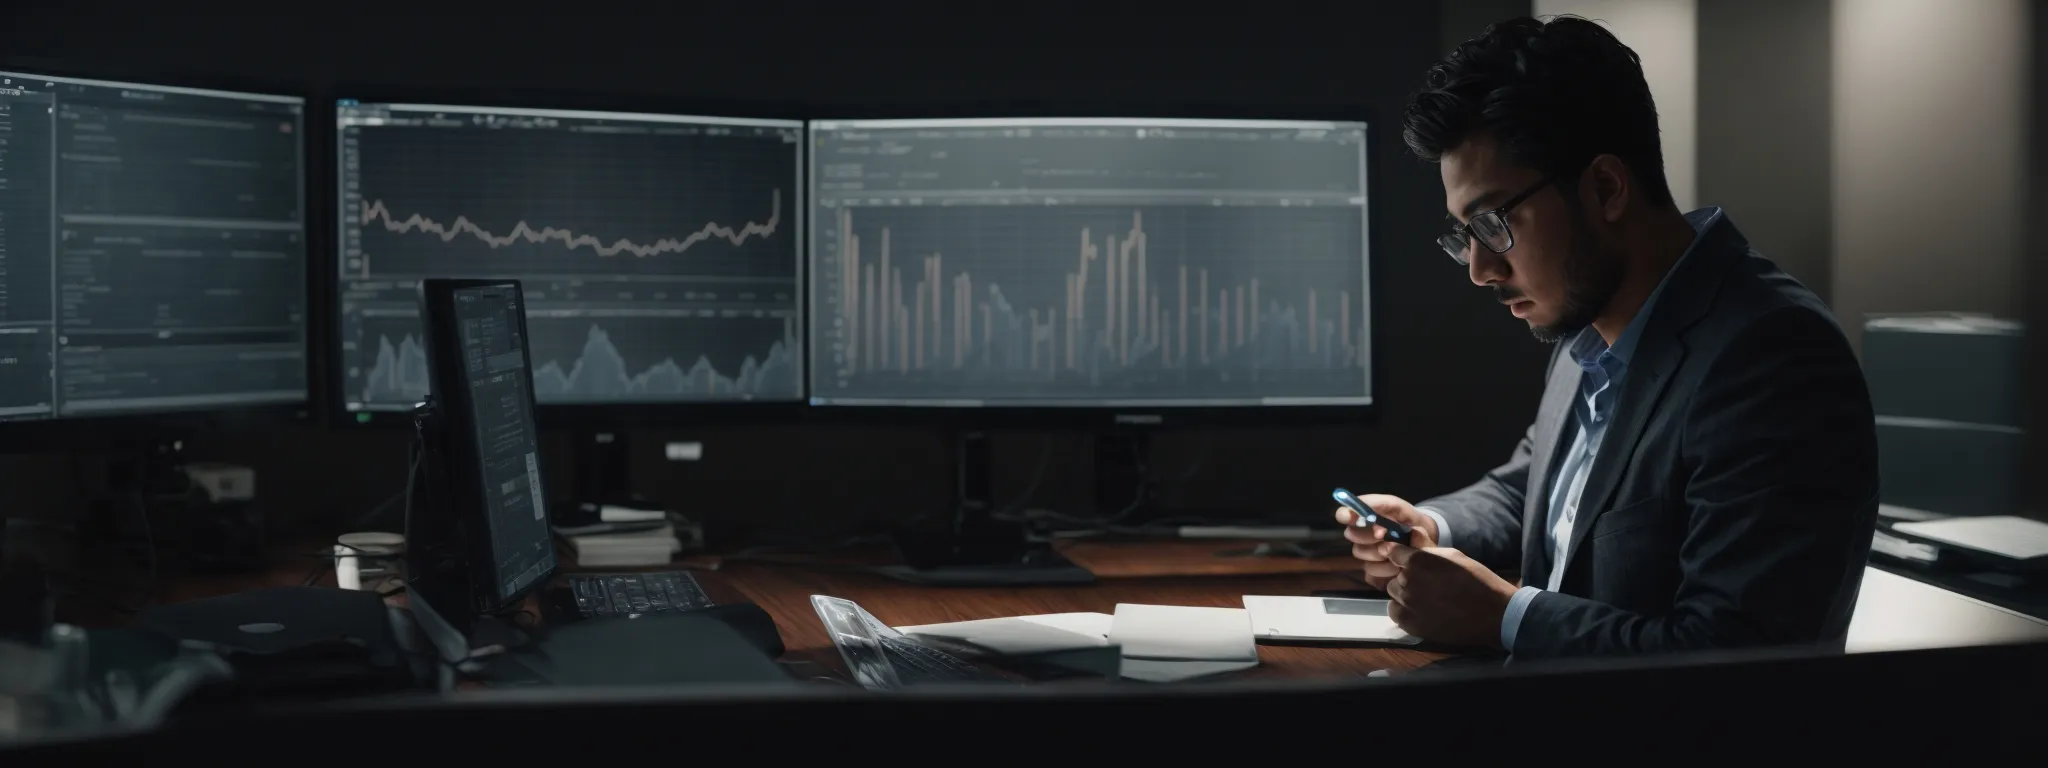 a focused individual analyzes graphs on a computer screen, strategizing an effective email marketing campaign.